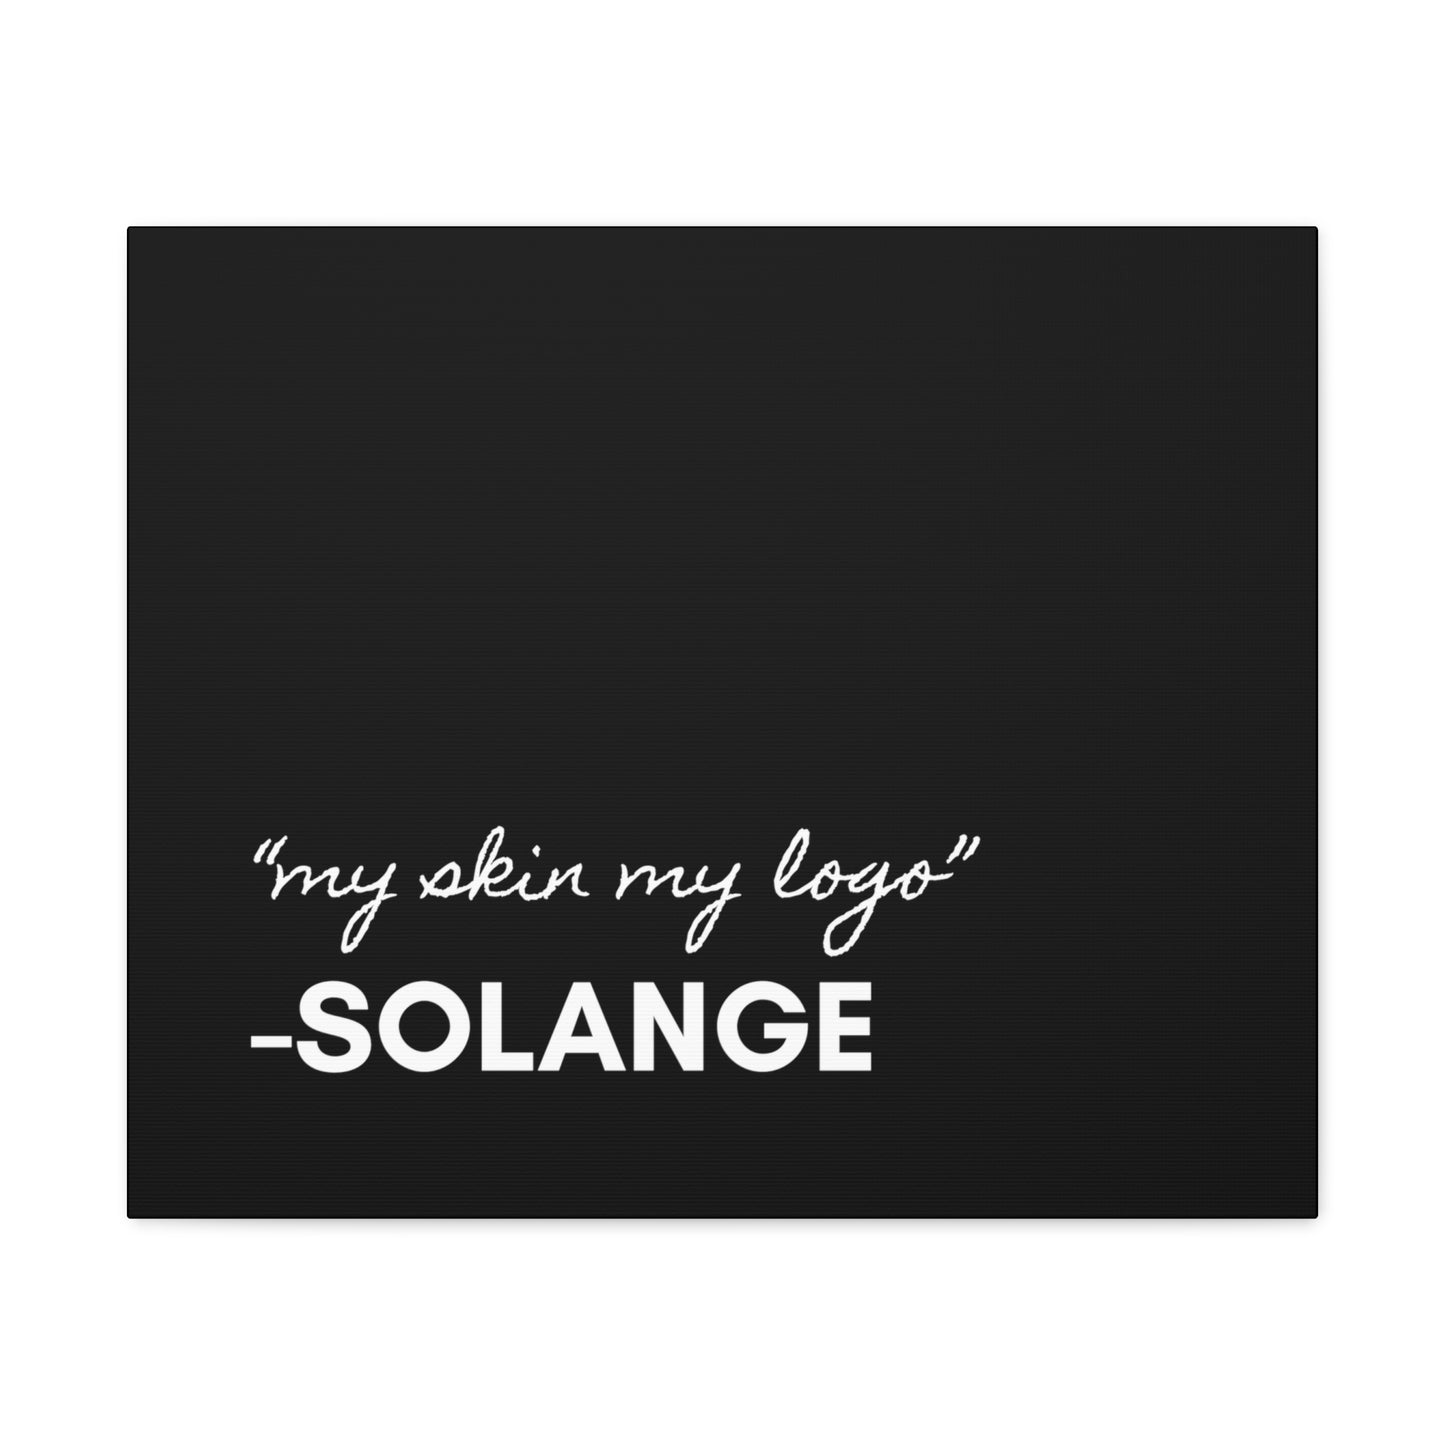 Words from Solange